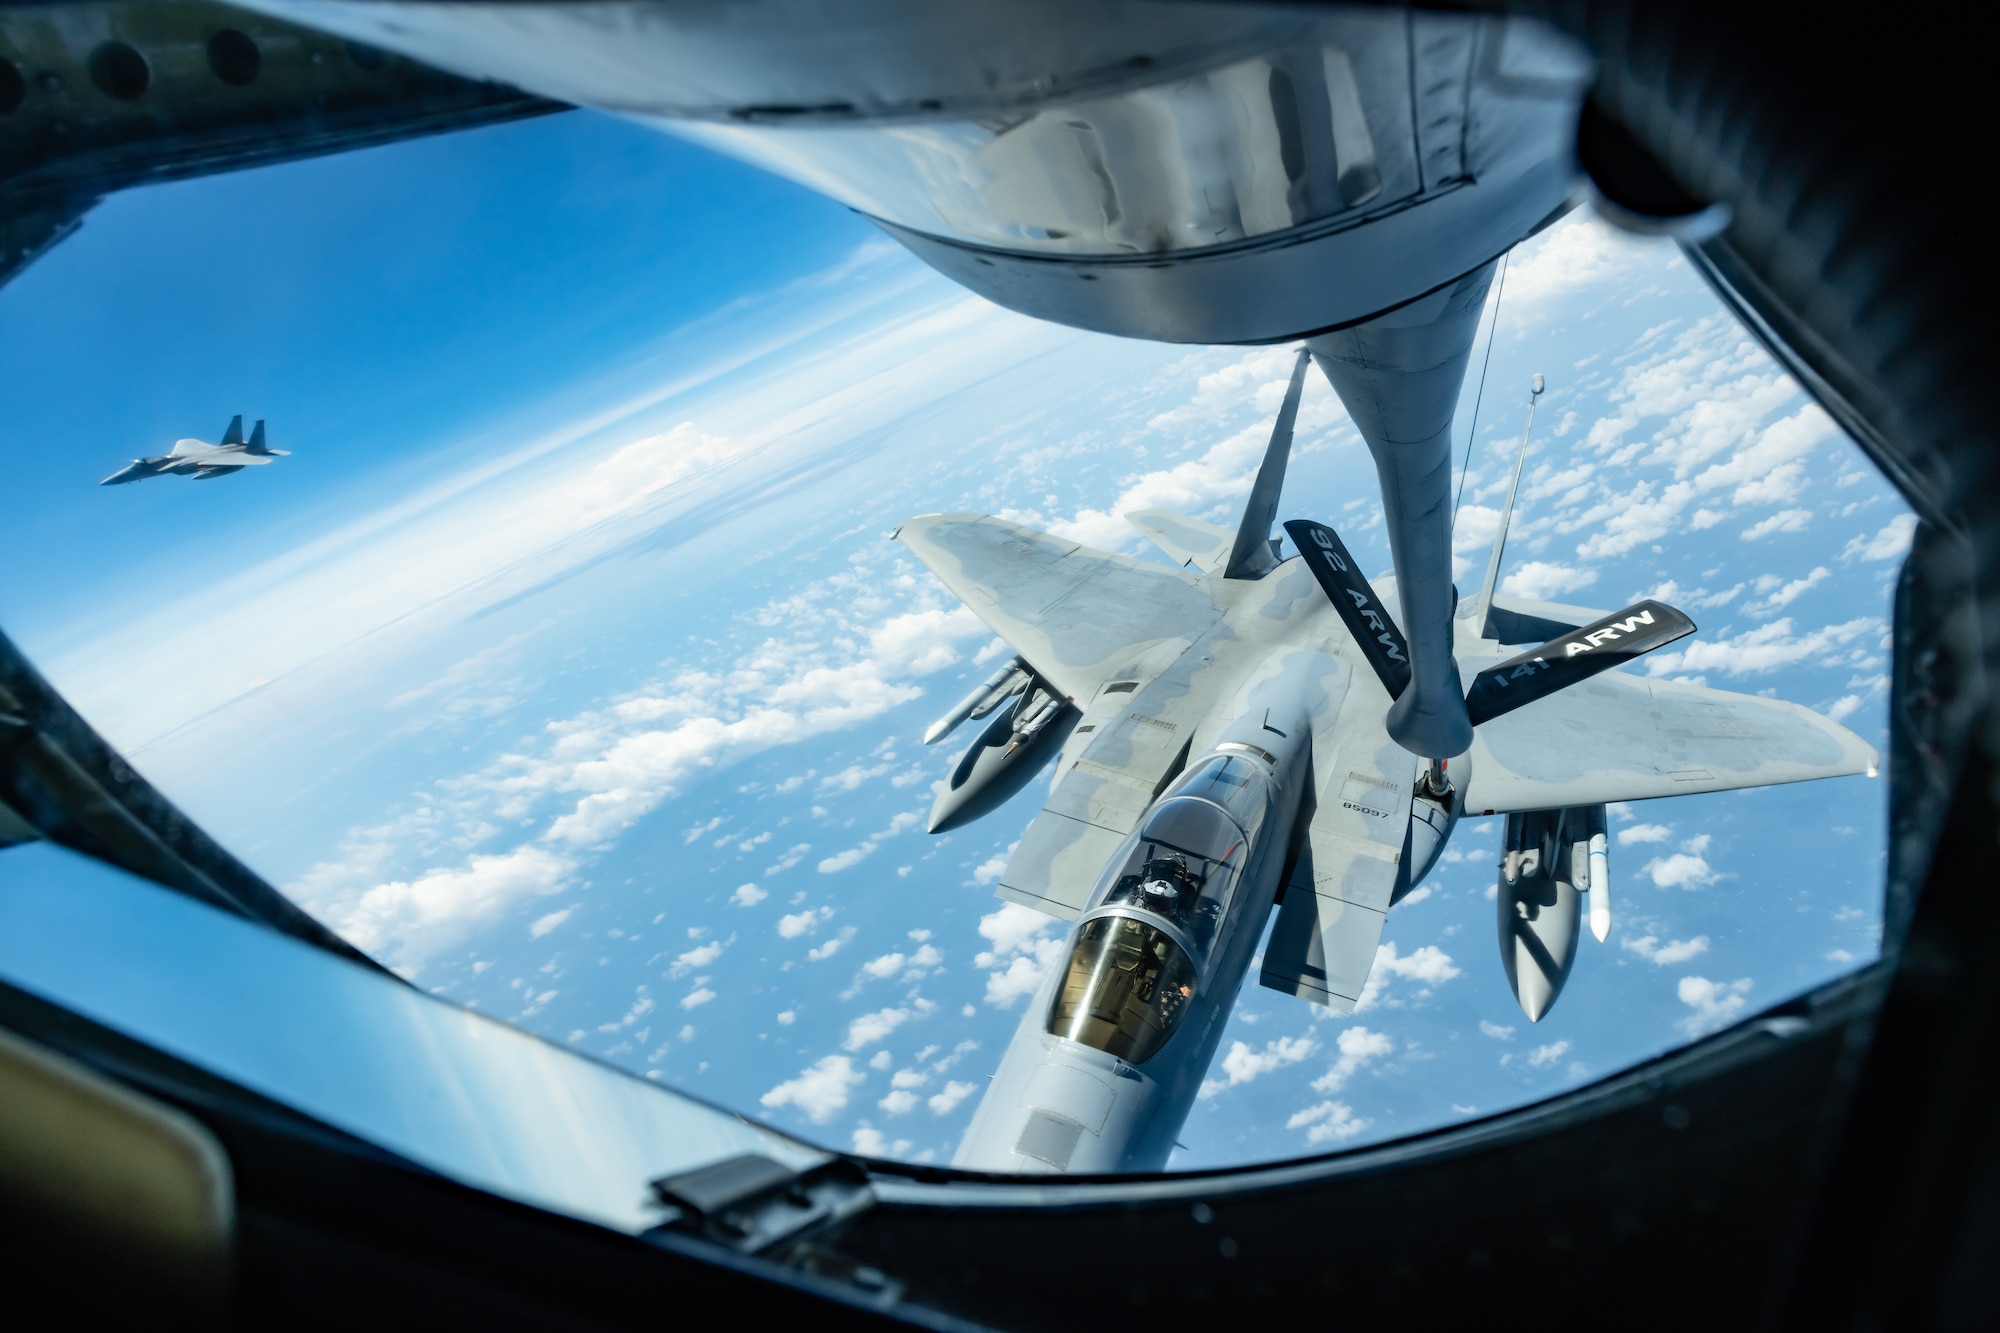 An F-15C Eagle from the 44th Fighter Squadron refuels with a KC-135 Stratotanker from the 909th Air Refuleing Squadron April 15, 2019, during a routine training exercise out of Kadena Air Base, Japan. The 909th ARS helps ensure a free-and-open Indo-Pacific by providing air refueling to U.S., allies and partners within the area of responsibility. (U.S. Air Force photo by Airman 1st Class Matthew Seefeldt)